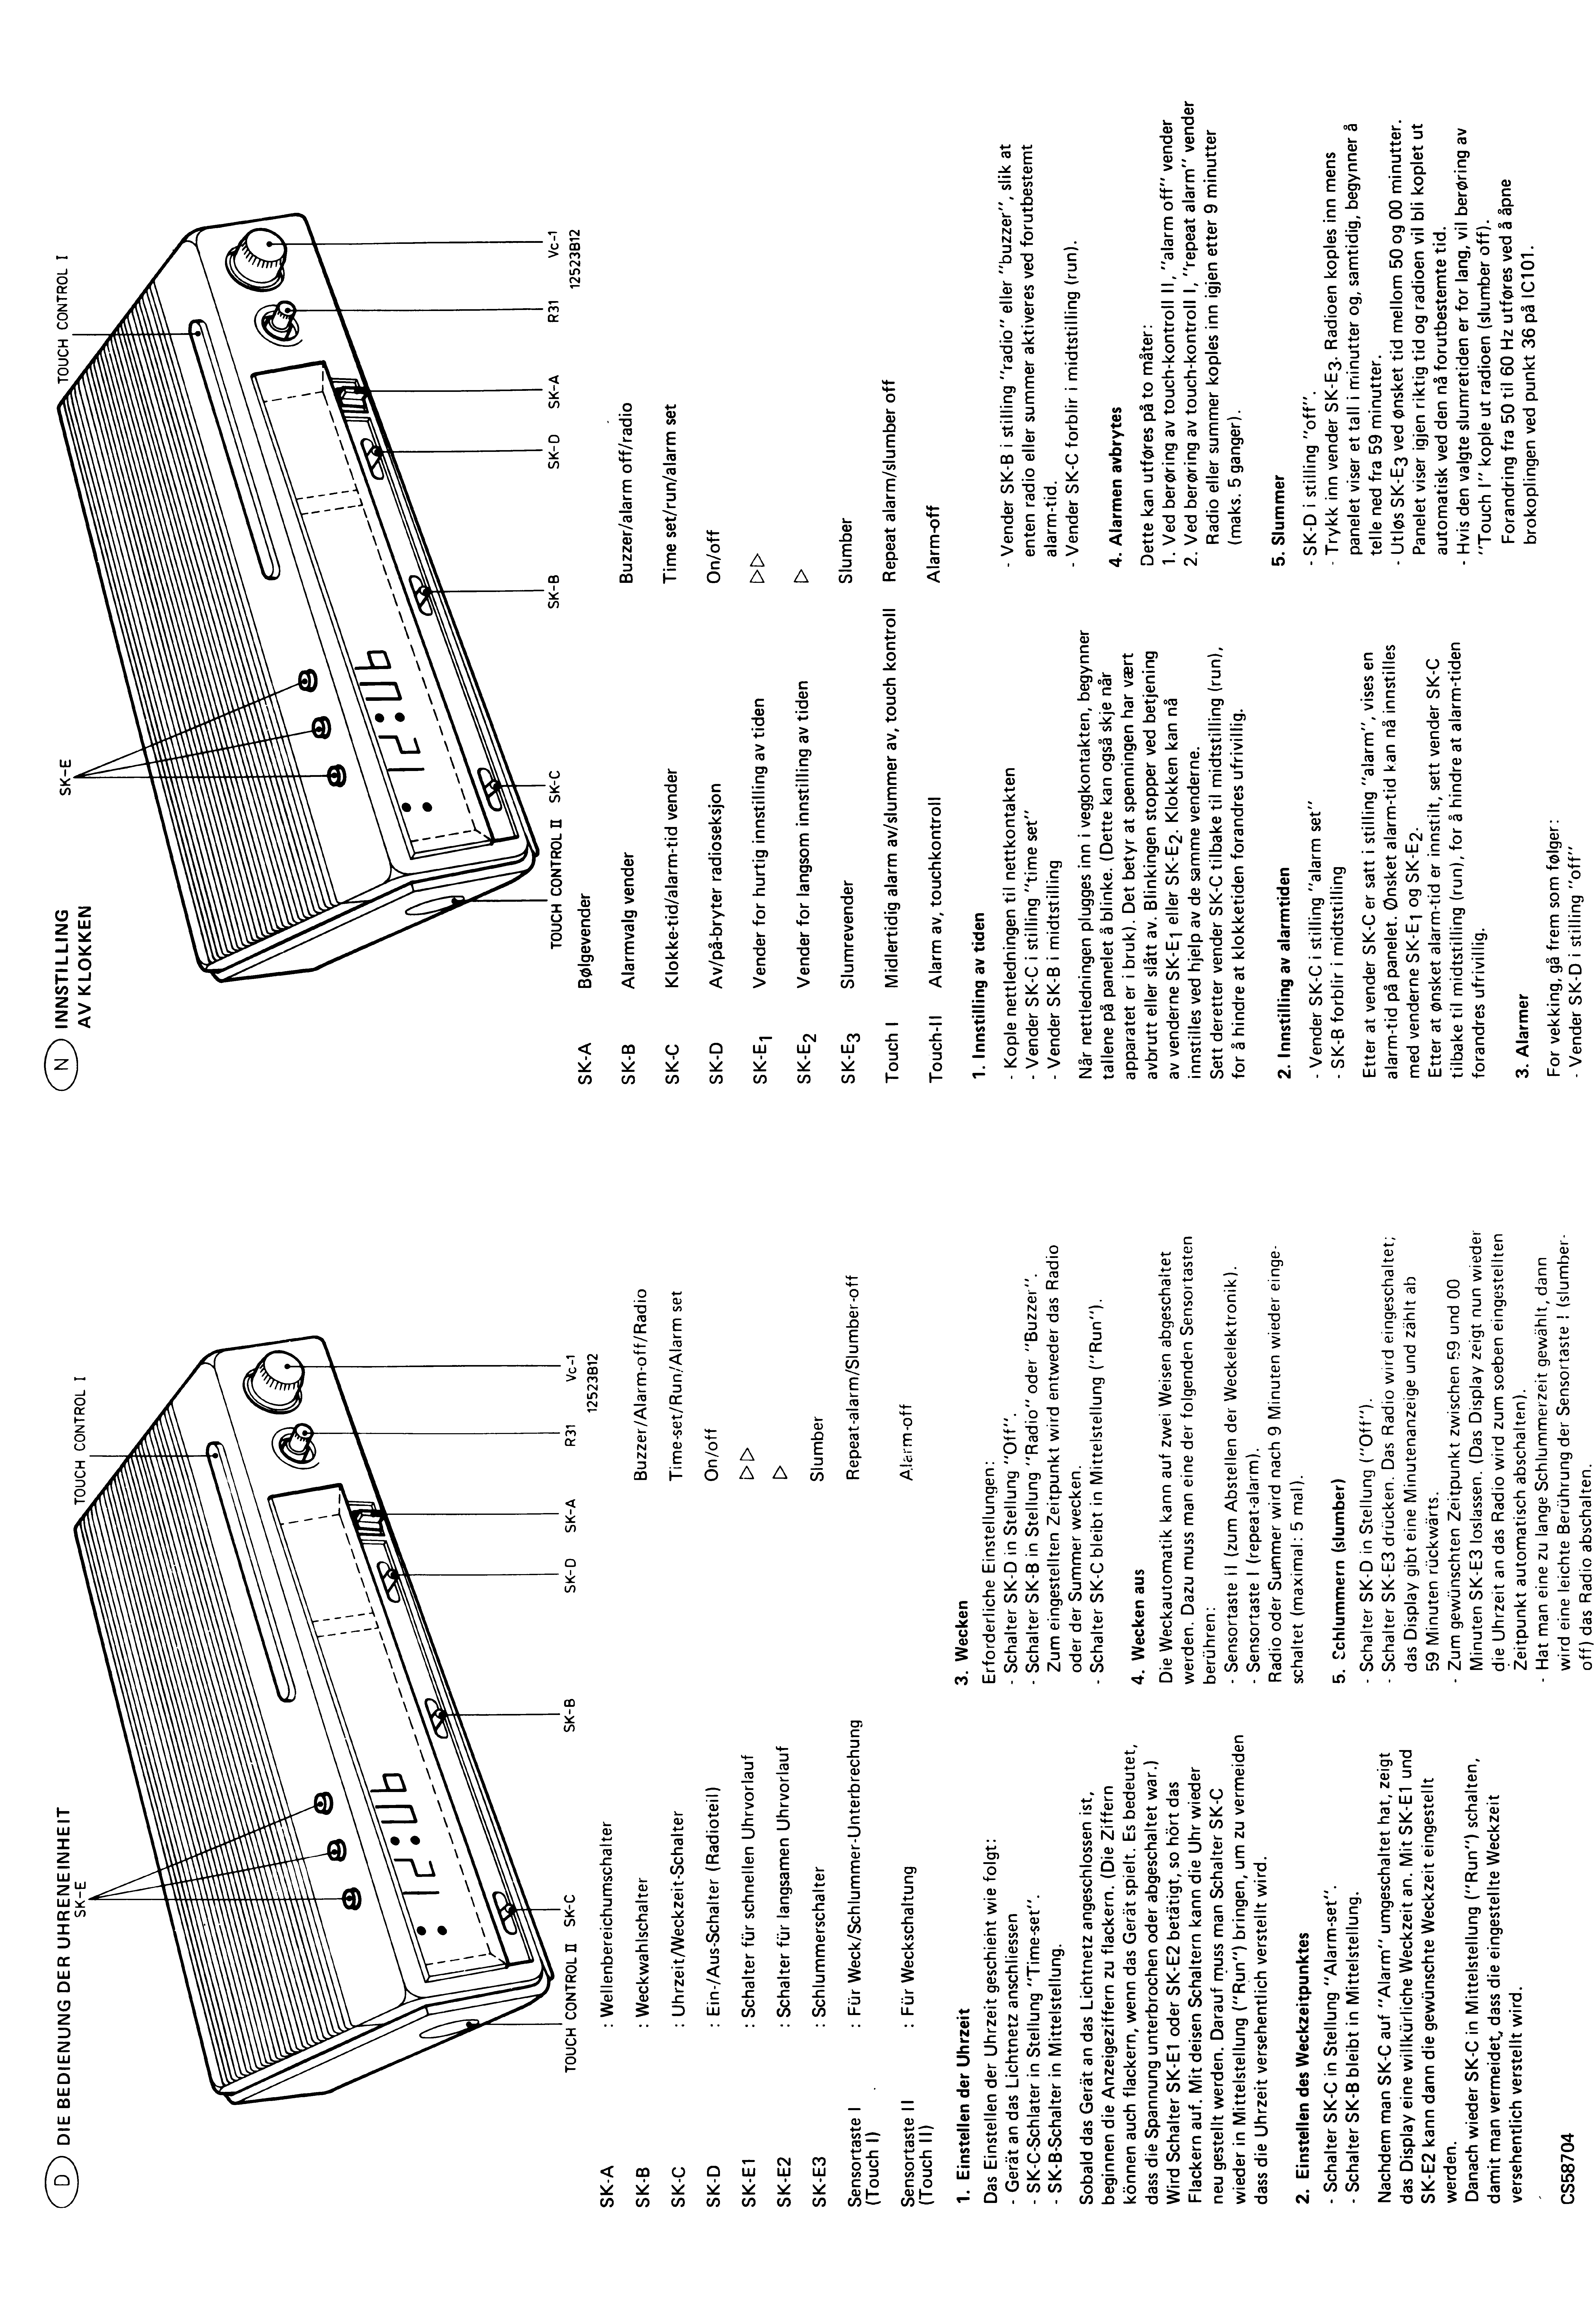 PHILIPS CLOCK-RADIO 90AS570 SM service manual (2nd page)